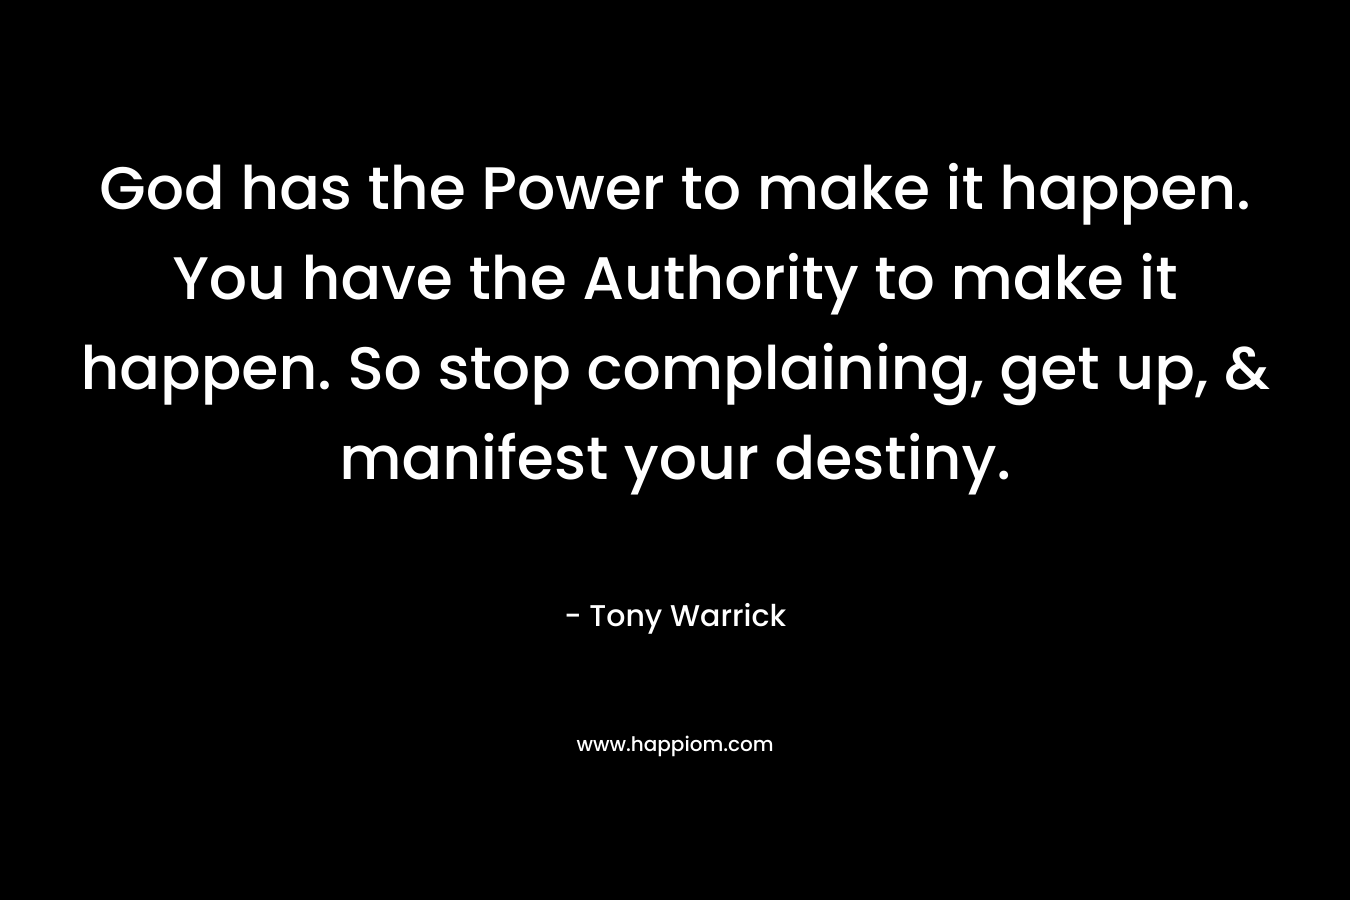 God has the Power to make it happen. You have the Authority to make it happen. So stop complaining, get up, & manifest your destiny. – Tony Warrick